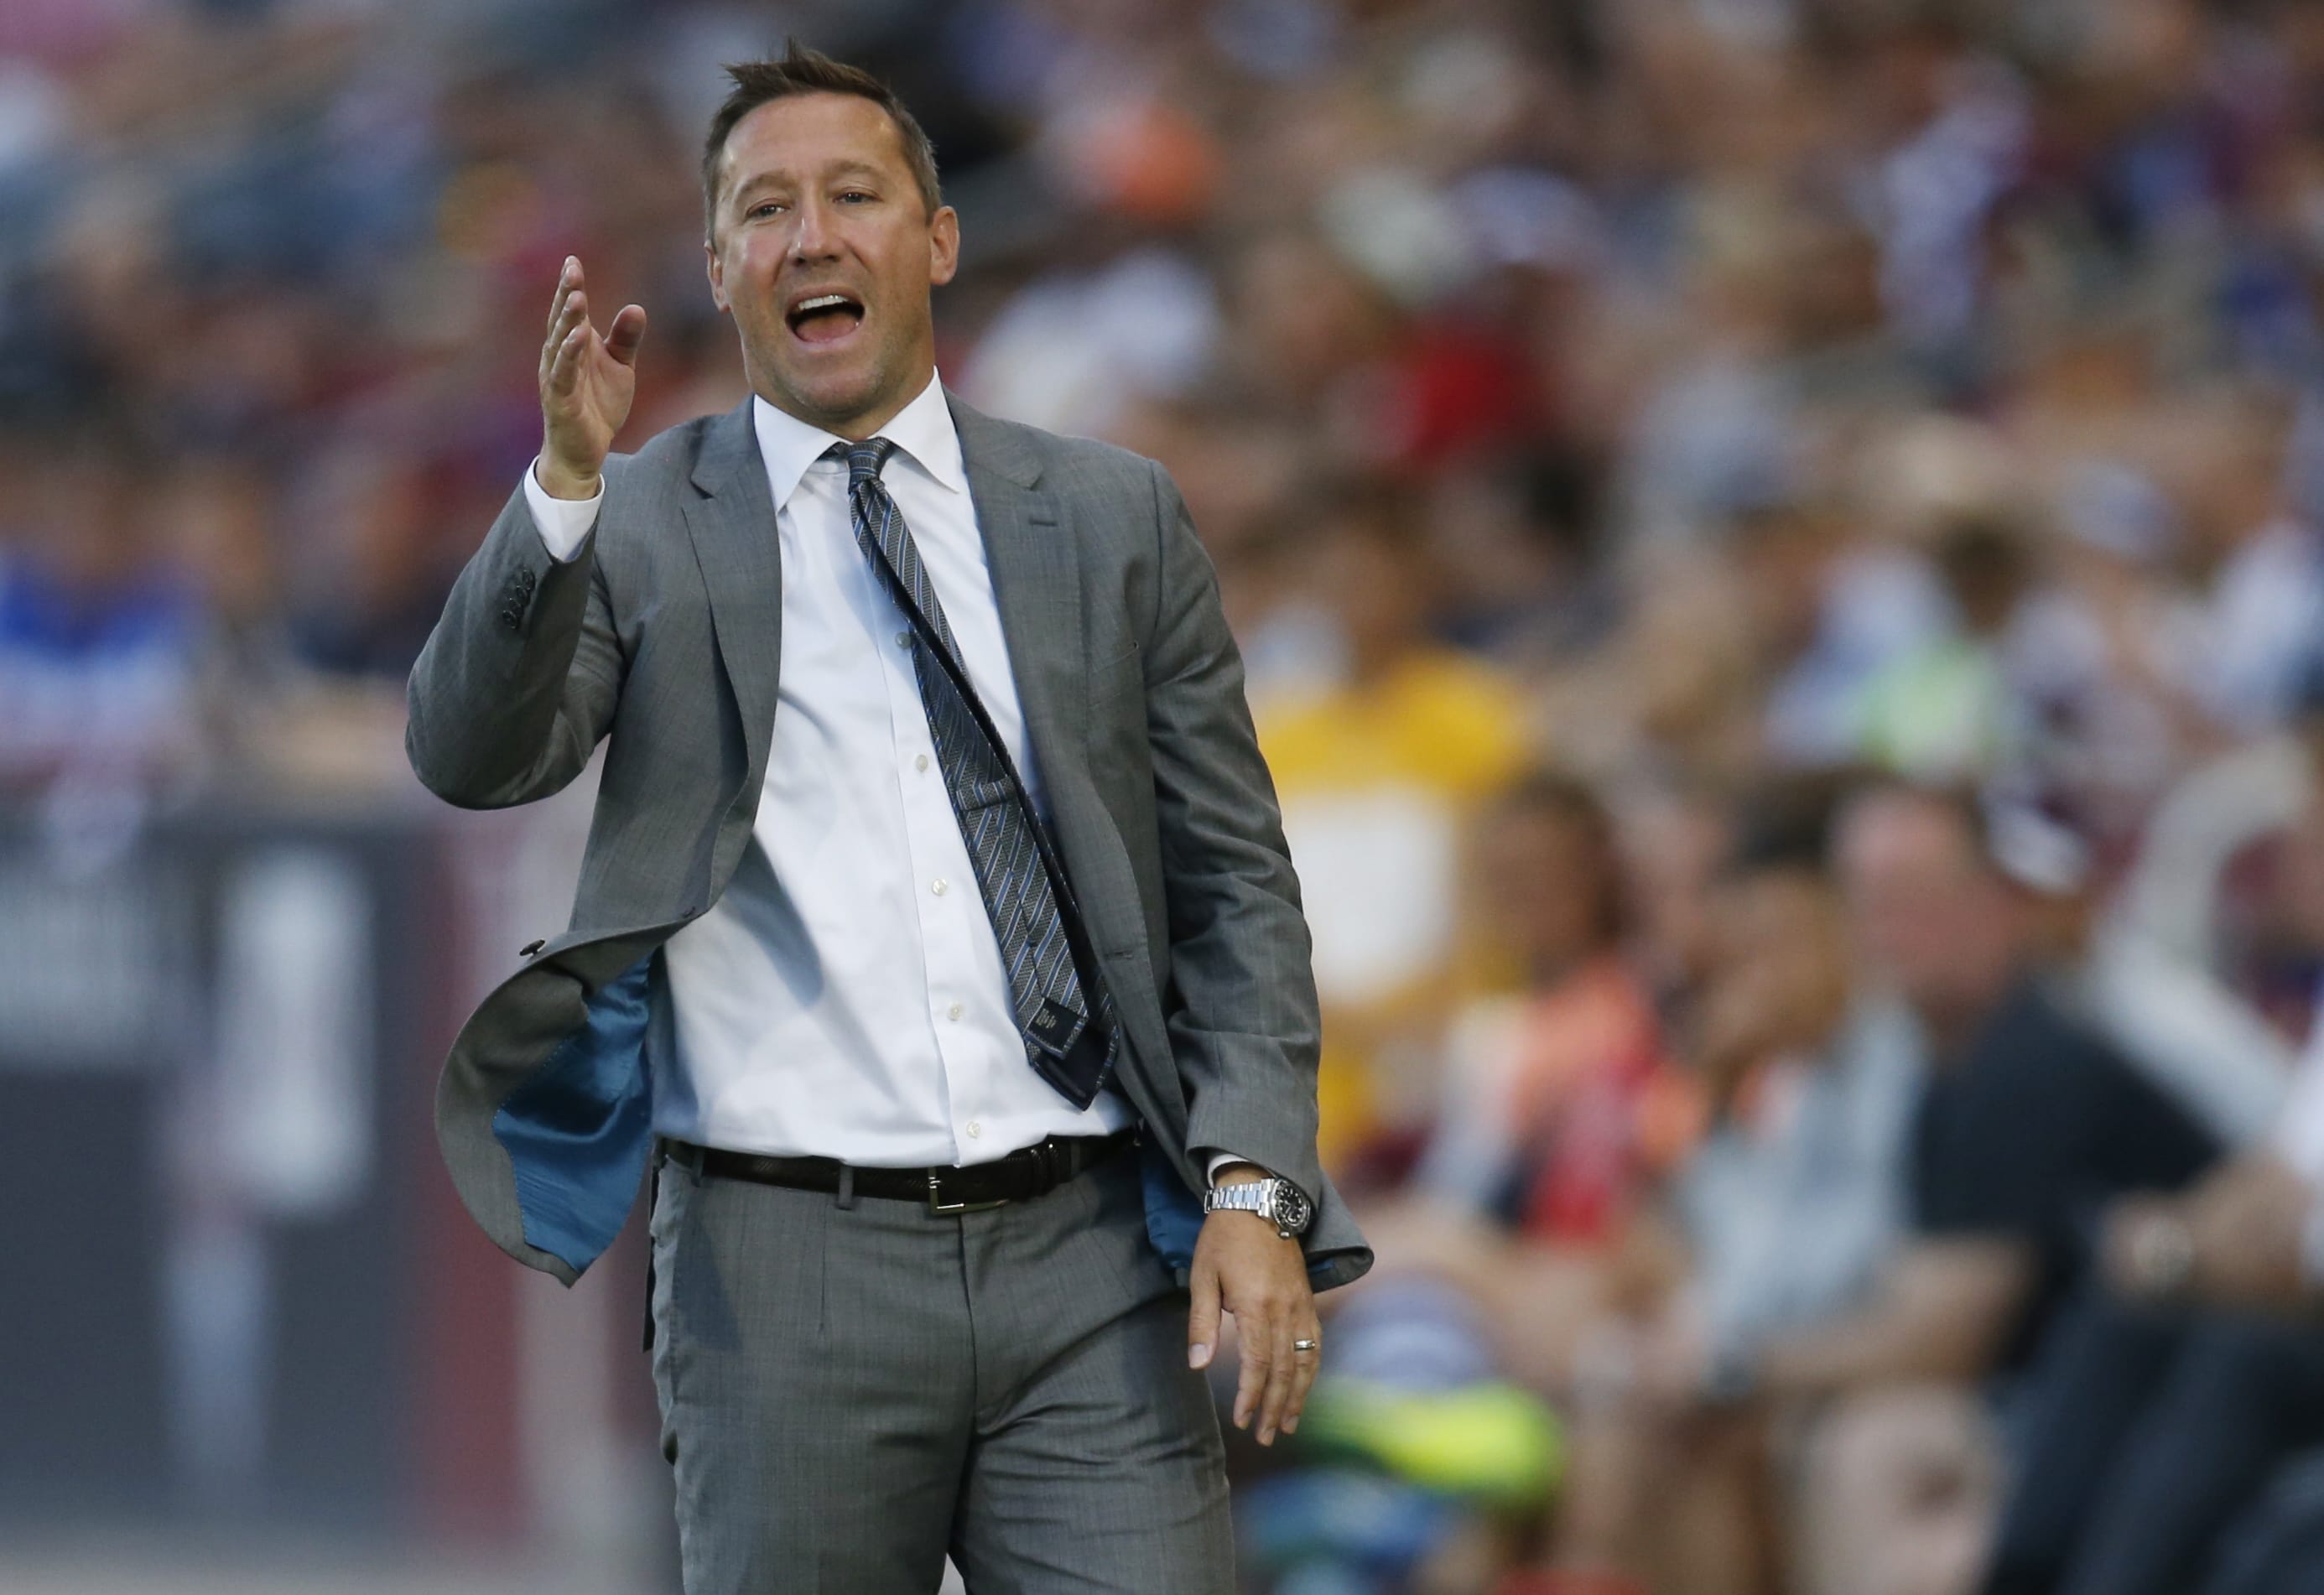 Portland Timbers head coach Caleb Porter directs his team against the Colorado Rapids in the first half of an MLS match Monday, July 4, 2016, in Commerce City, Colo.